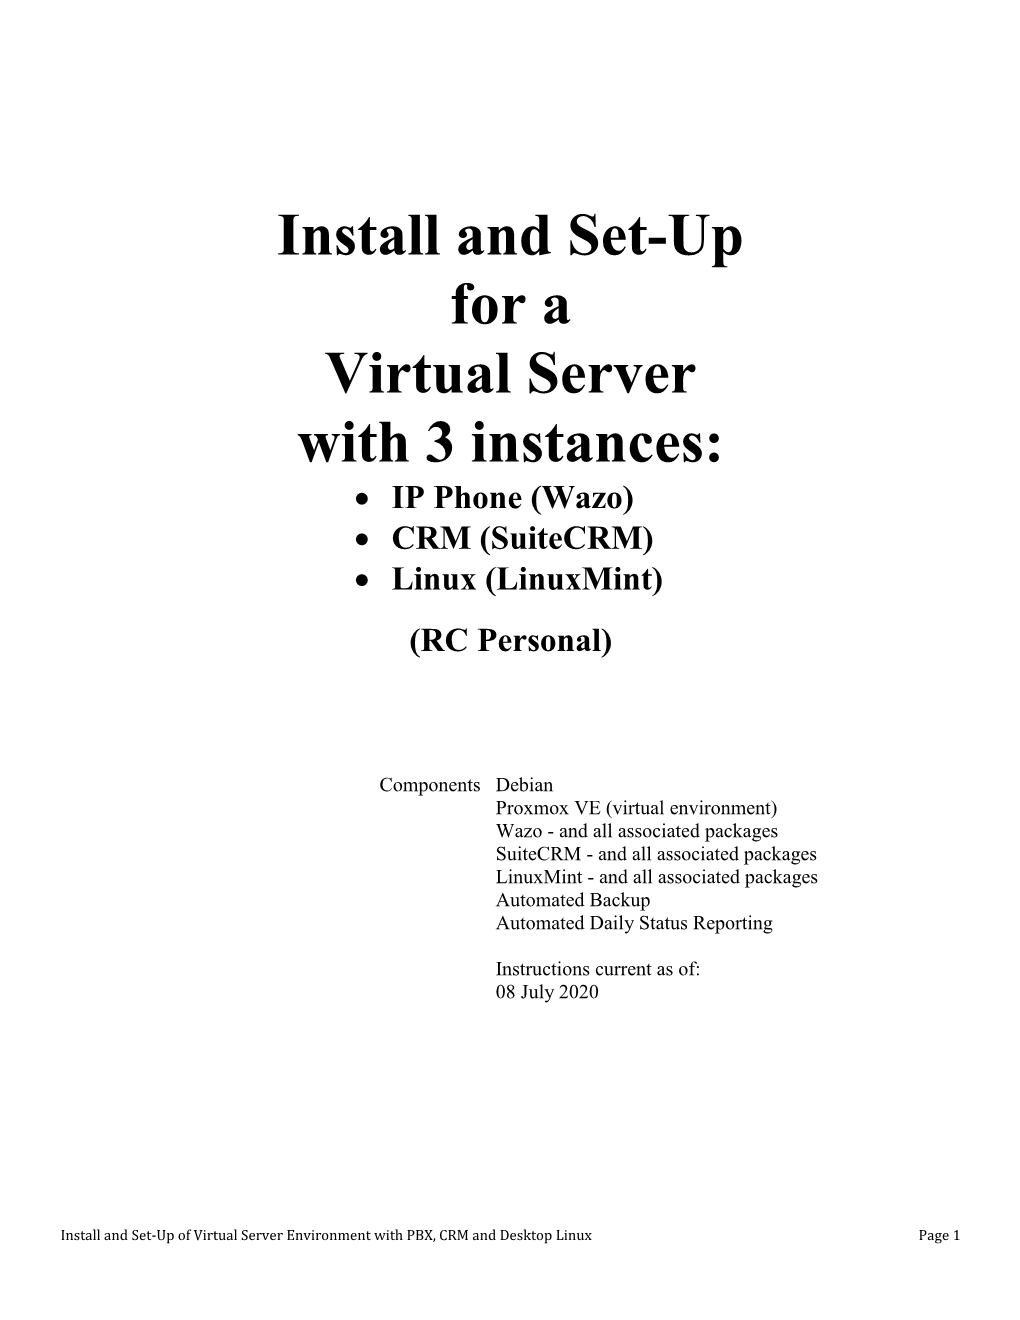 Install and Set-Up for a Virtual Server with 3 Instances:  IP Phone (Wazo)  CRM (Suitecrm)  Linux (Linuxmint)